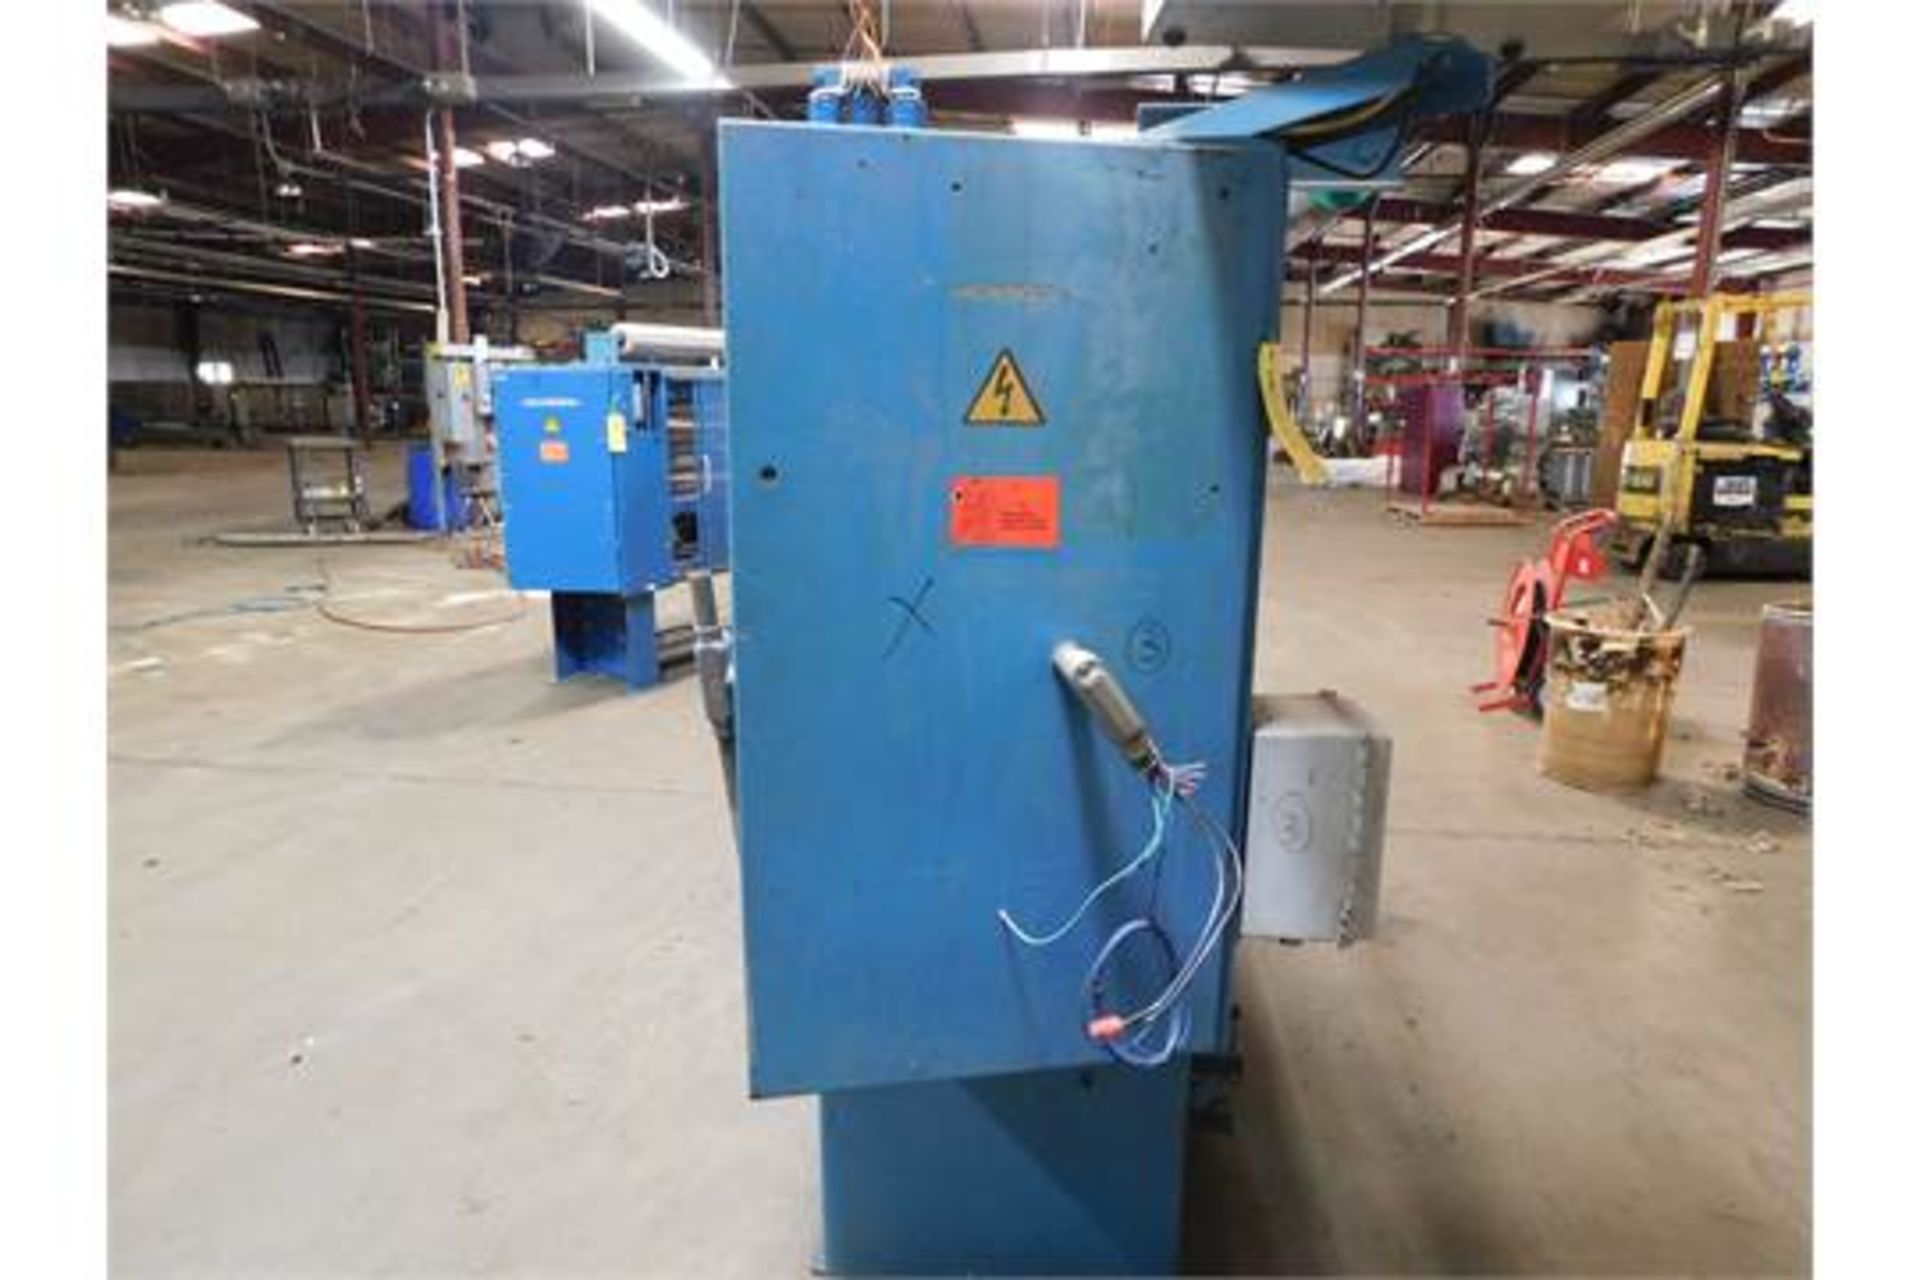 Mahlo System Straitening Machine: Model RFMC 94H, 440/3Volts, Working Length: 78", Rigging Fee $50 - Image 3 of 4